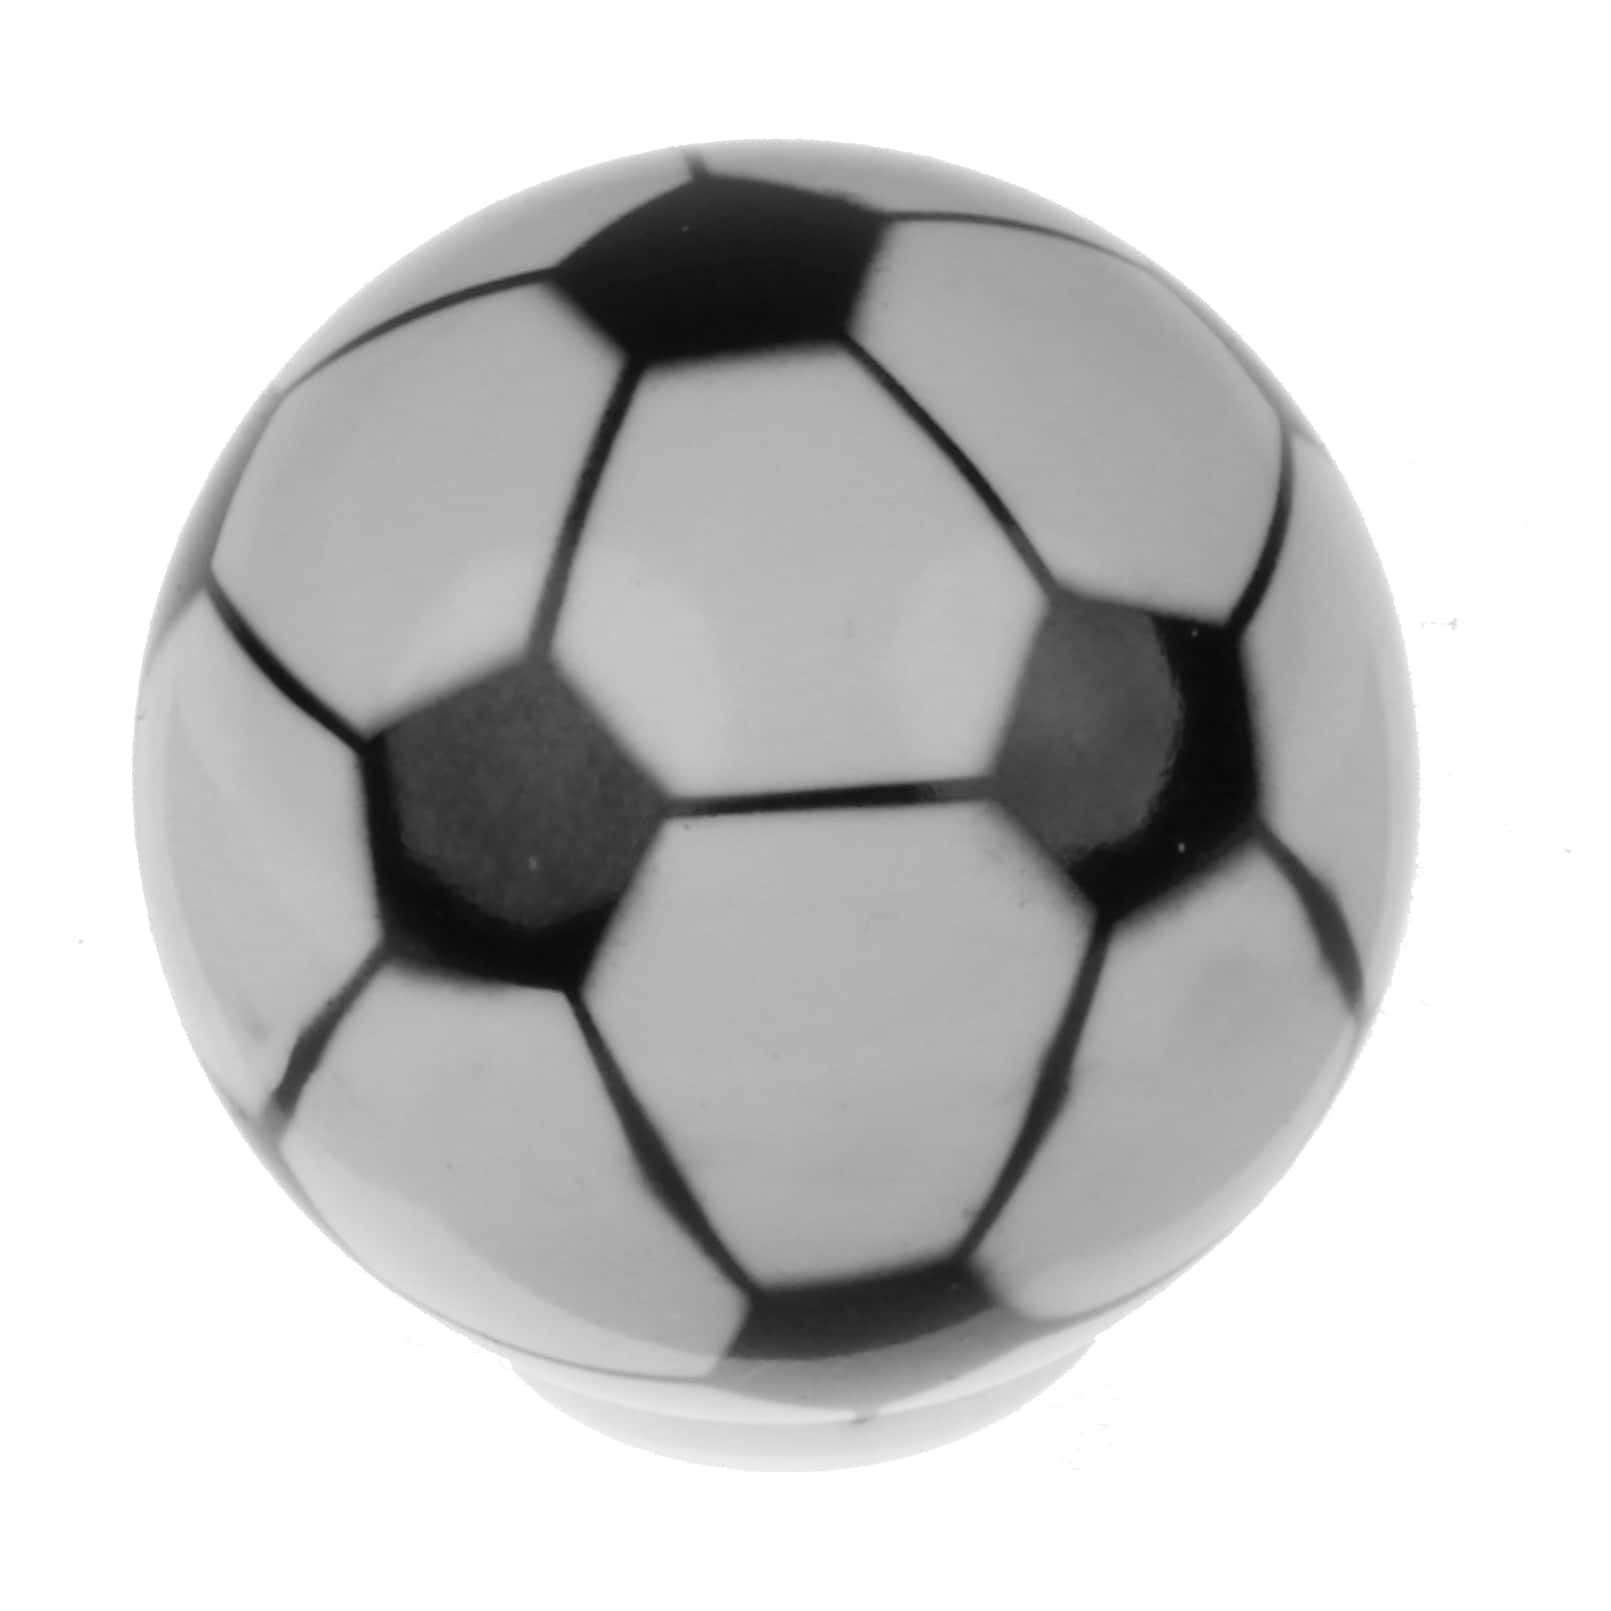 GlideRite 1-1/4 in. Soccer Ball Sports Dresser Drawer Cabinet Knobs, Pack of 10 - image 1 of 3